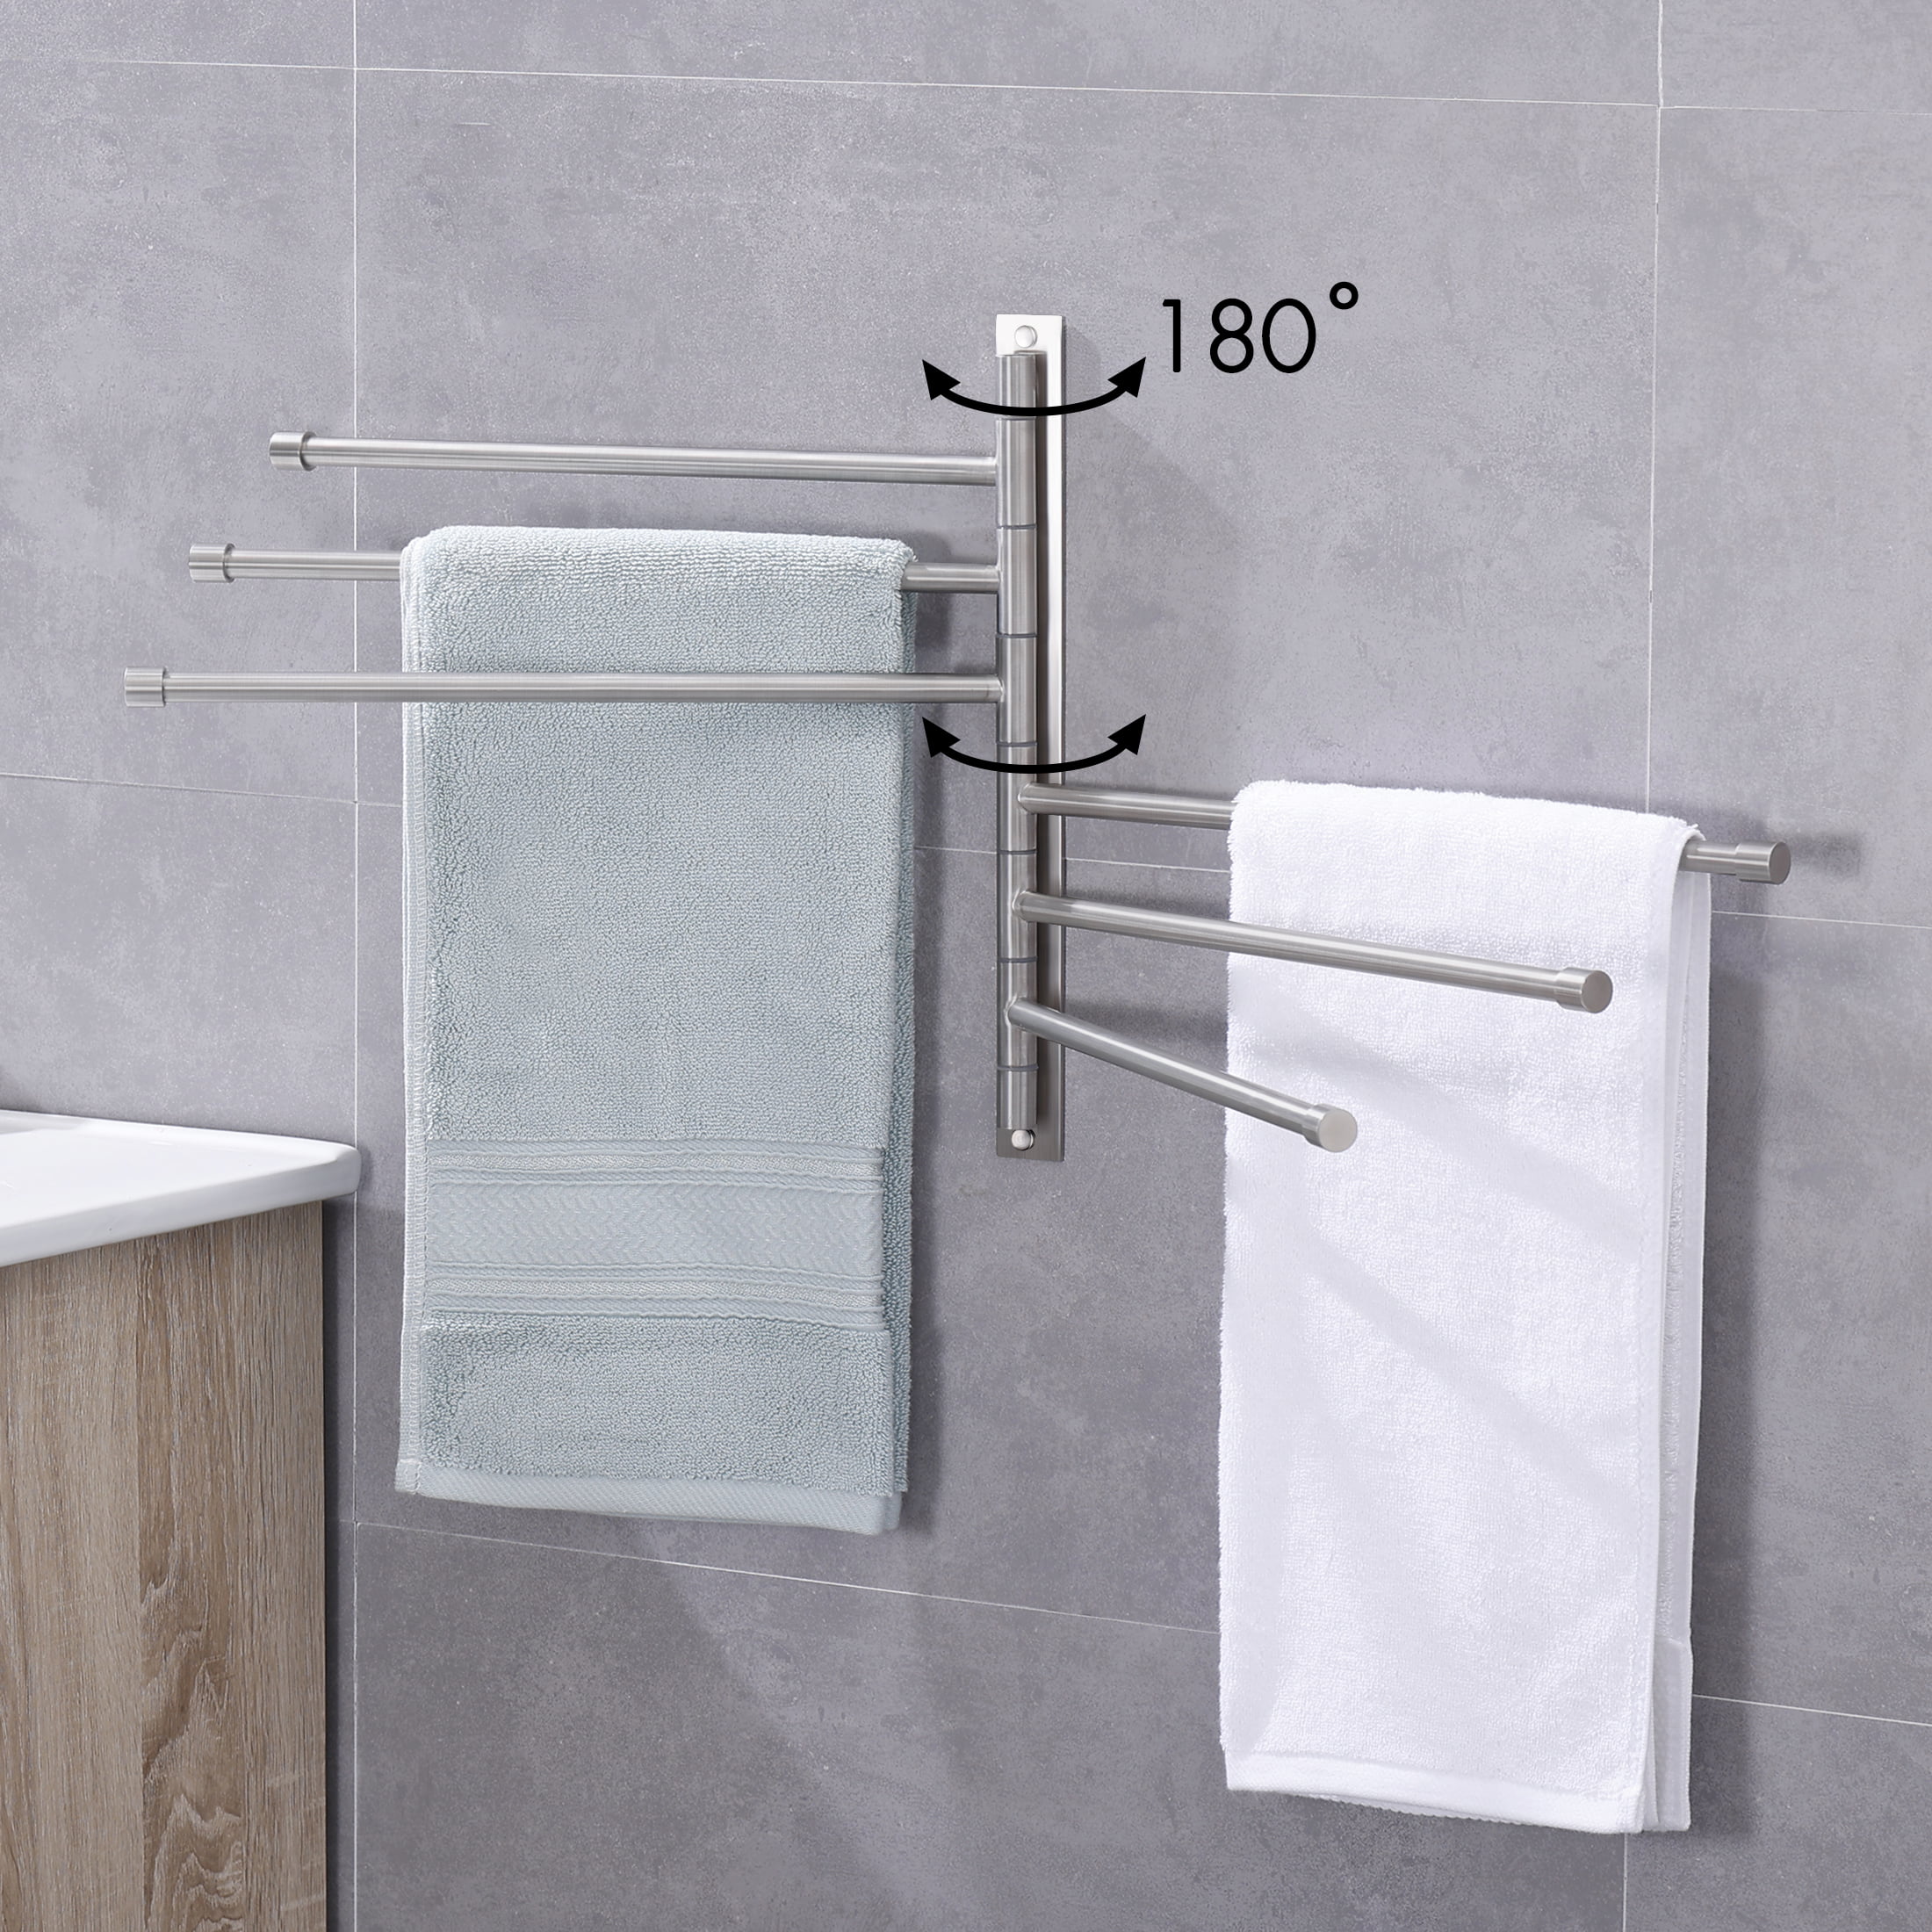 KES Swivel Towel Bar 9-Inch Swing Out Towel Rack Bathroom 2-Arm Wall  Mounted SUS 304 Stainless Steel Brushed Finish, A2106S23-2